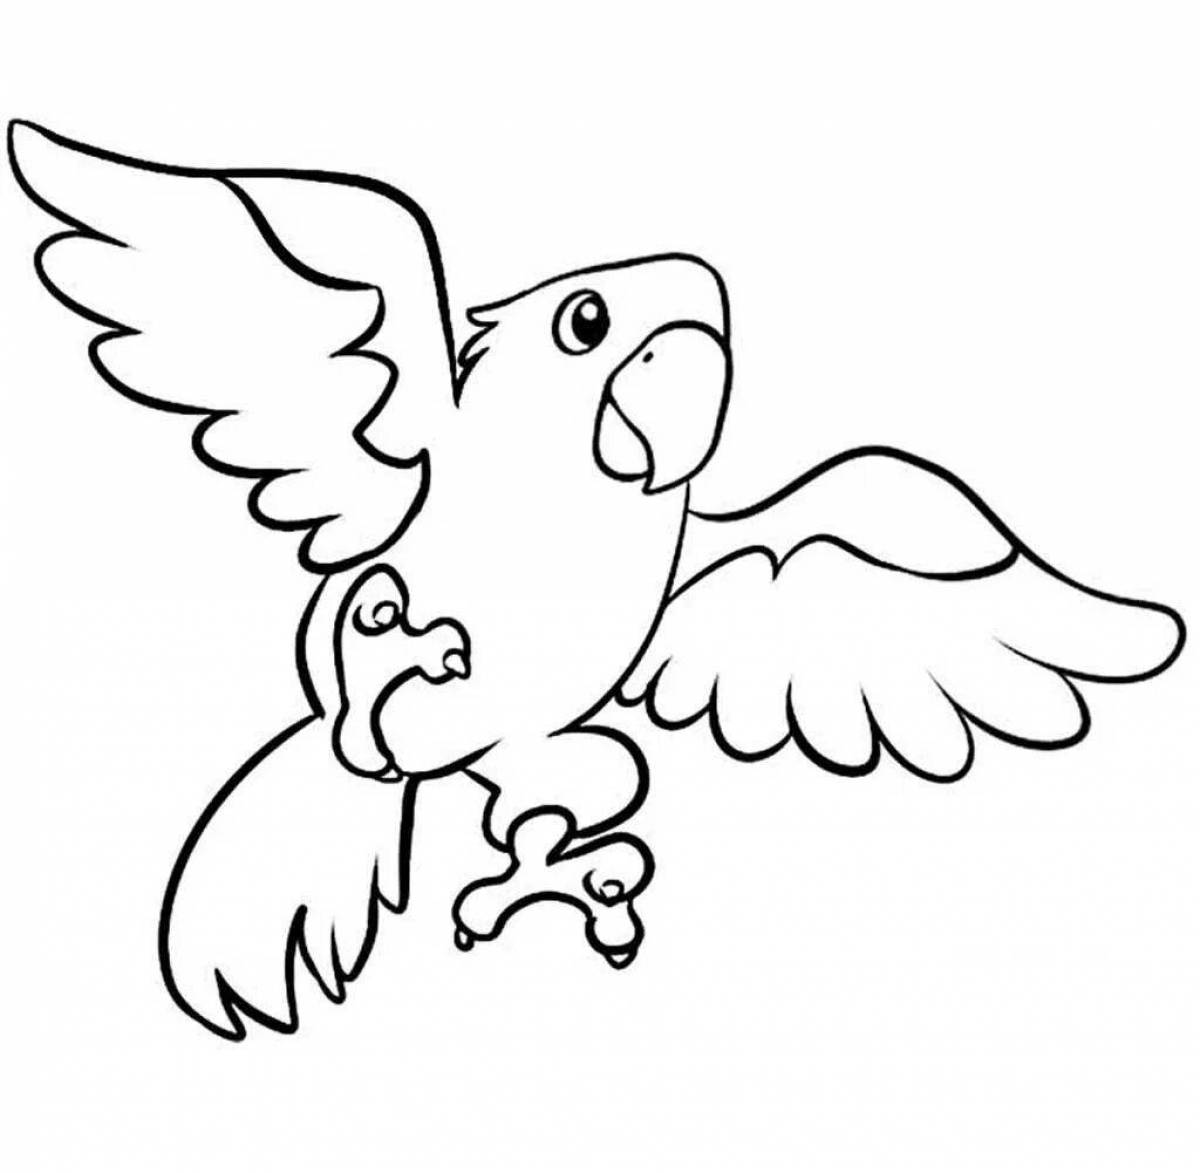 Colorful parrot coloring page